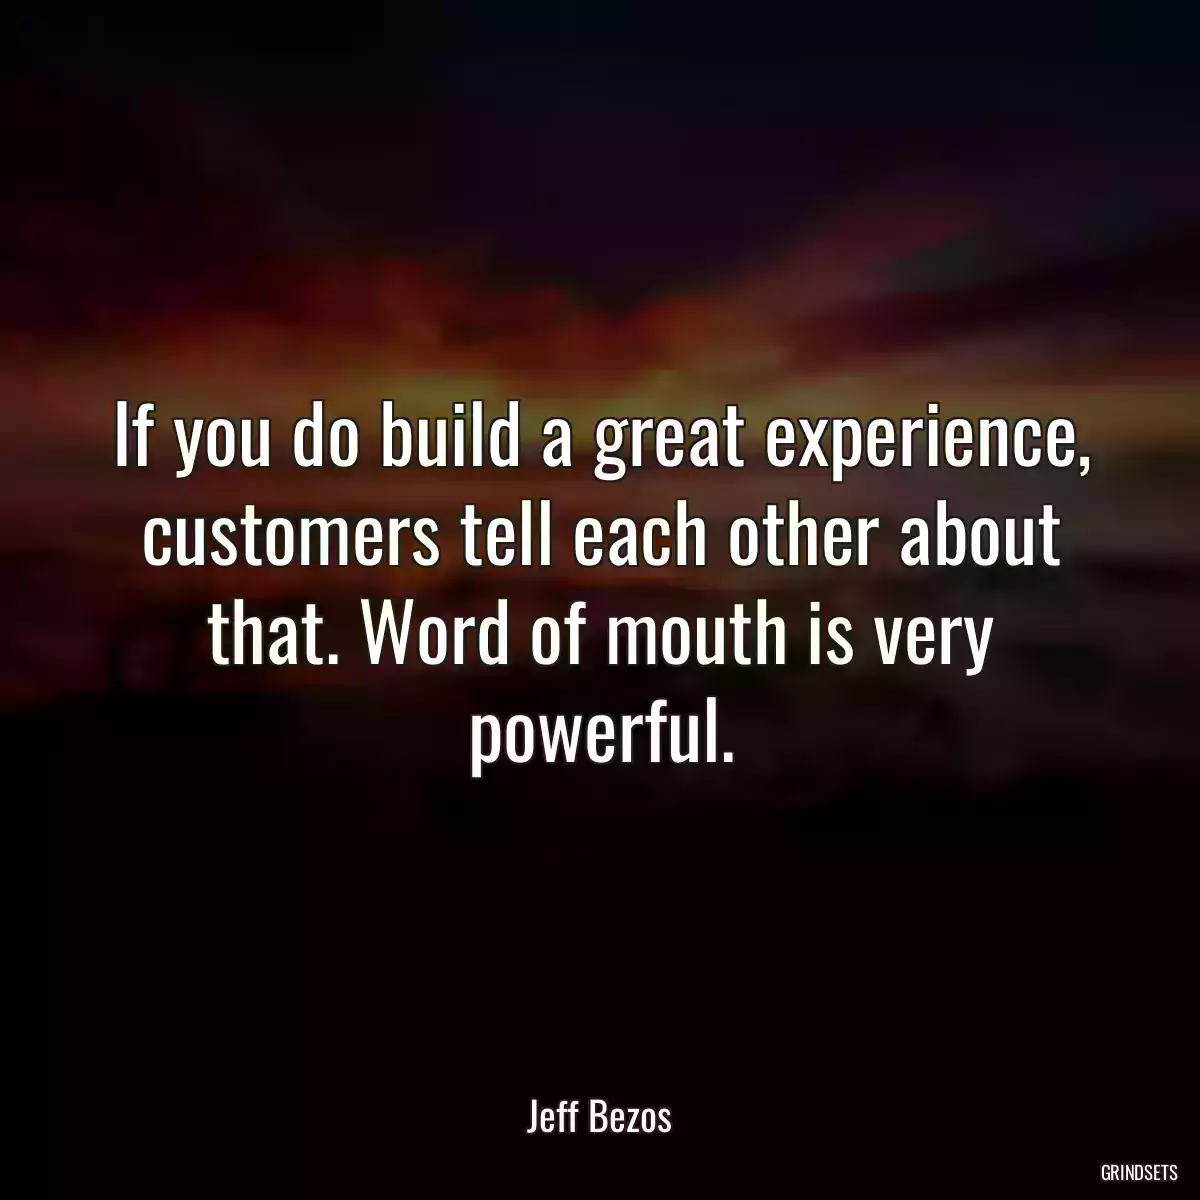 If you do build a great experience, customers tell each other about that. Word of mouth is very powerful.